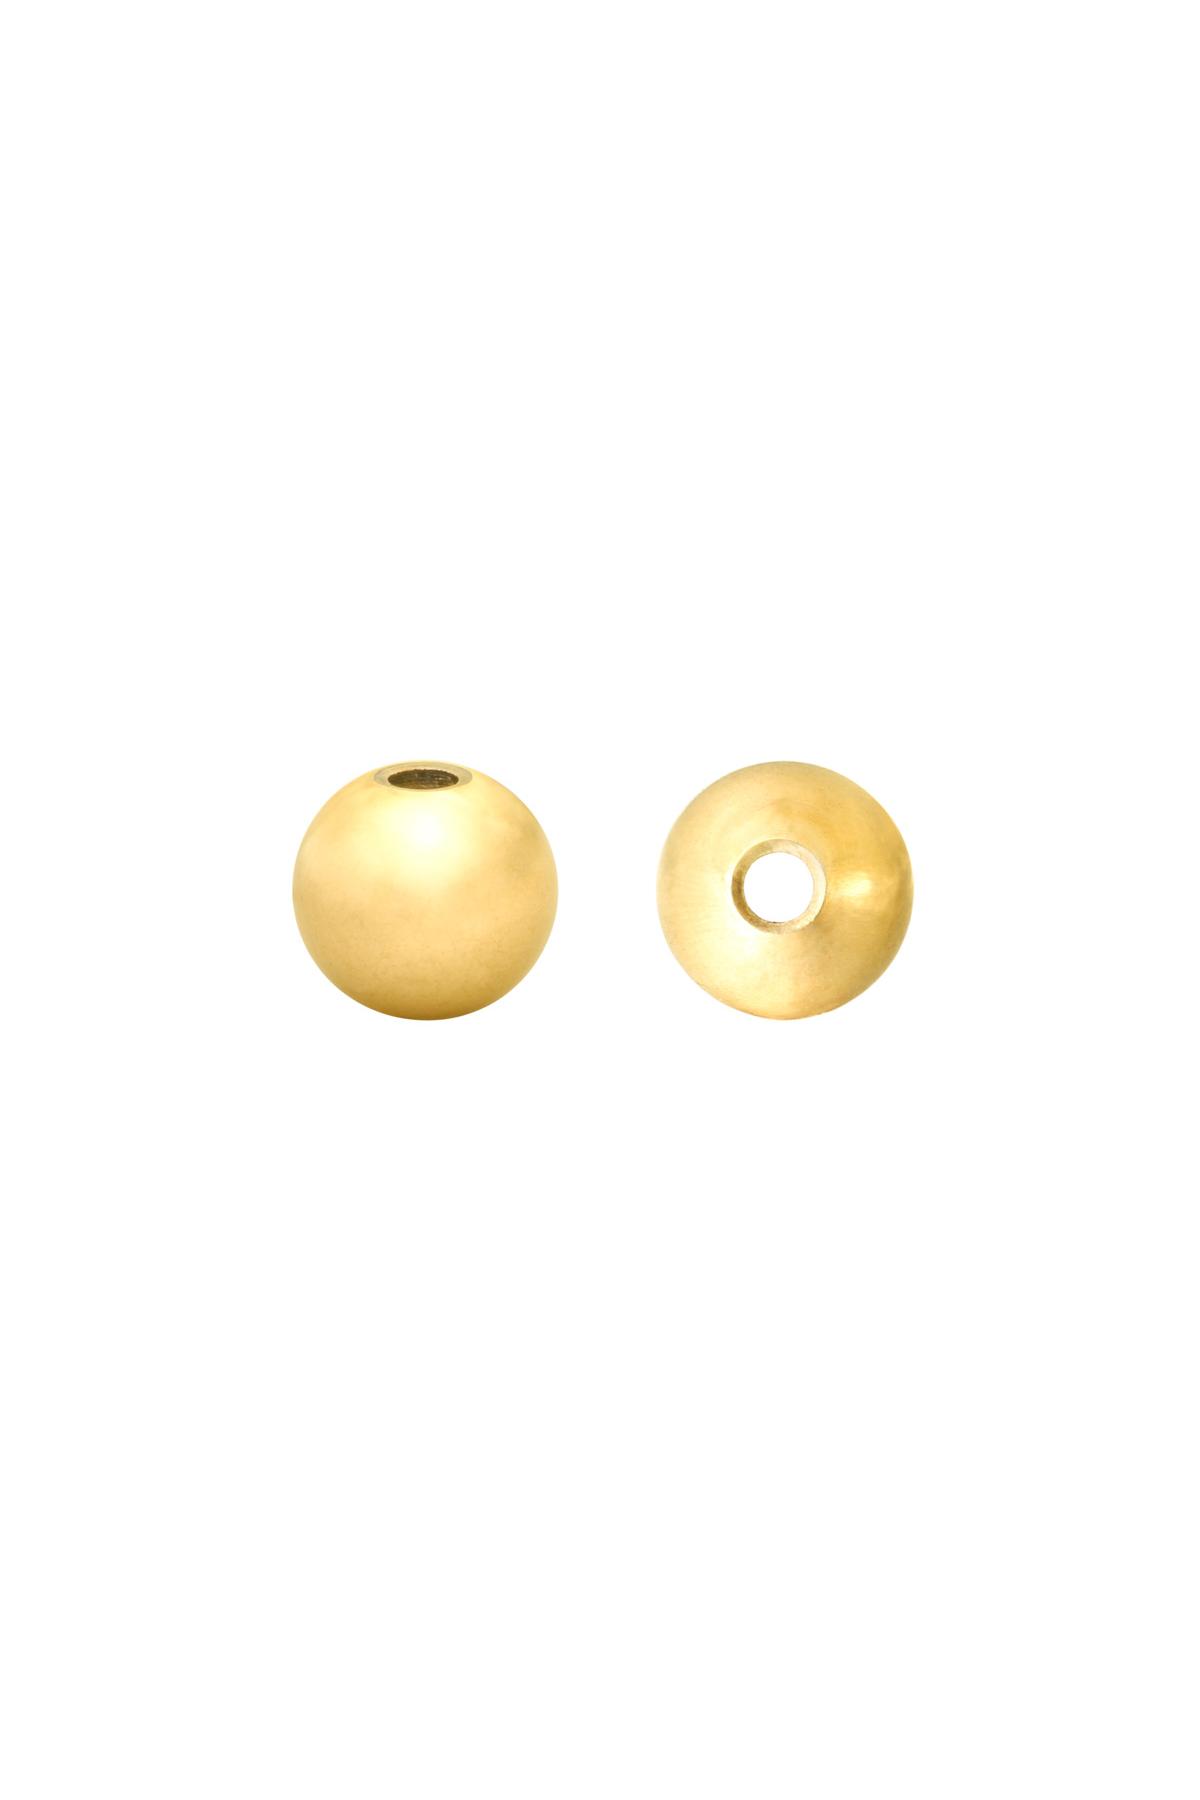 DIY Beads Ball 6MM Gold Stainless Steel h5 